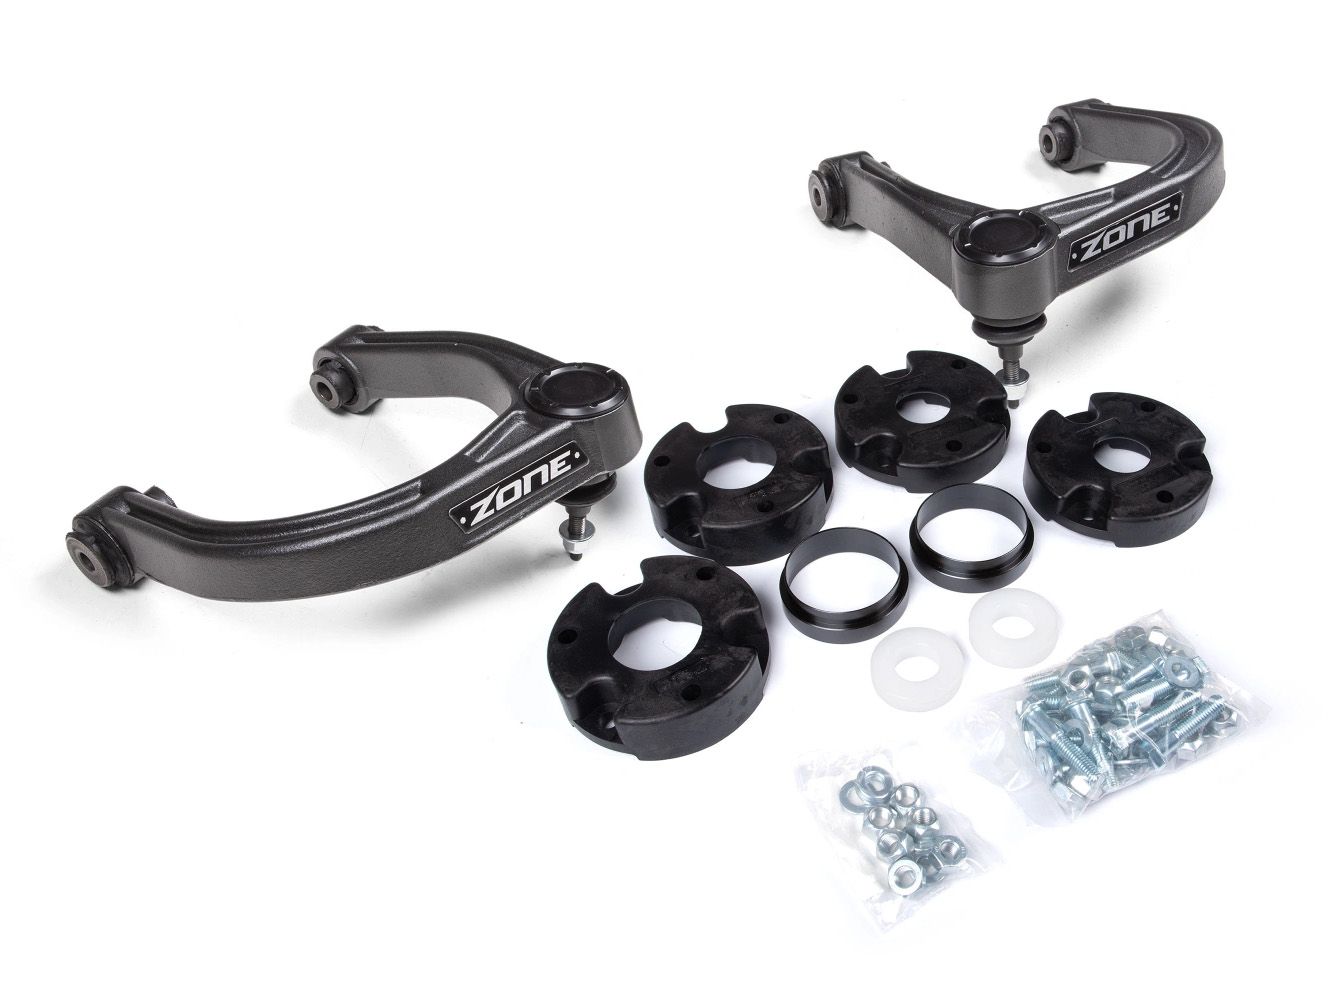 2.25" Ford Bronco 2022-2023 (HOSS 3.0 models) Adventure Series Lift Kit by Zone